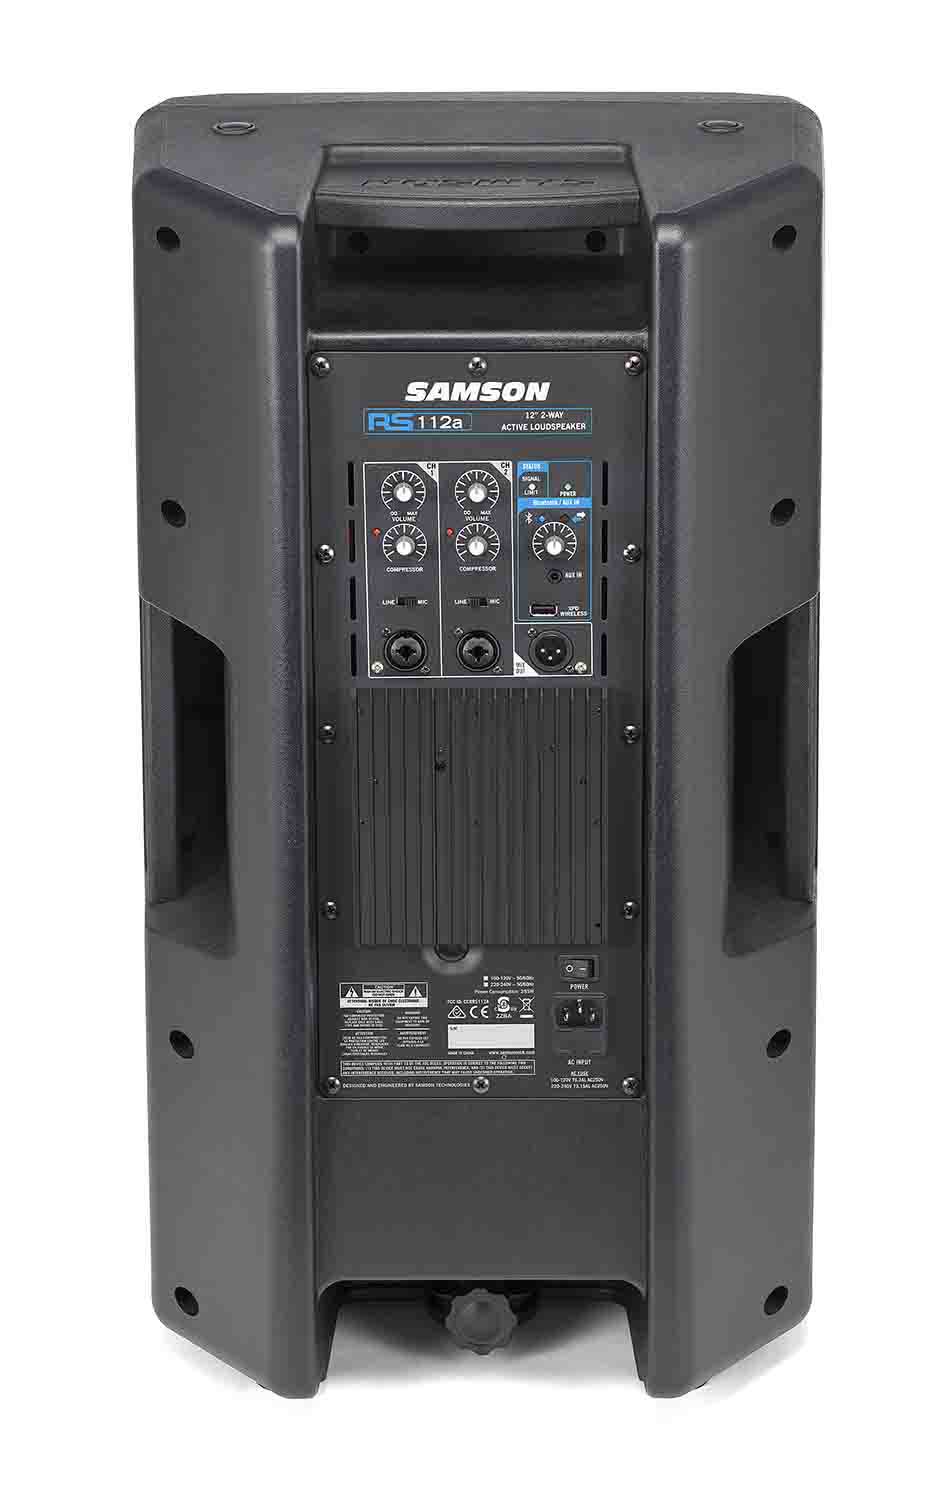 Samson RS112A 400W 2-Way Active Loudspeaker with Bluetooth - 12 Inch - Hollywood DJ